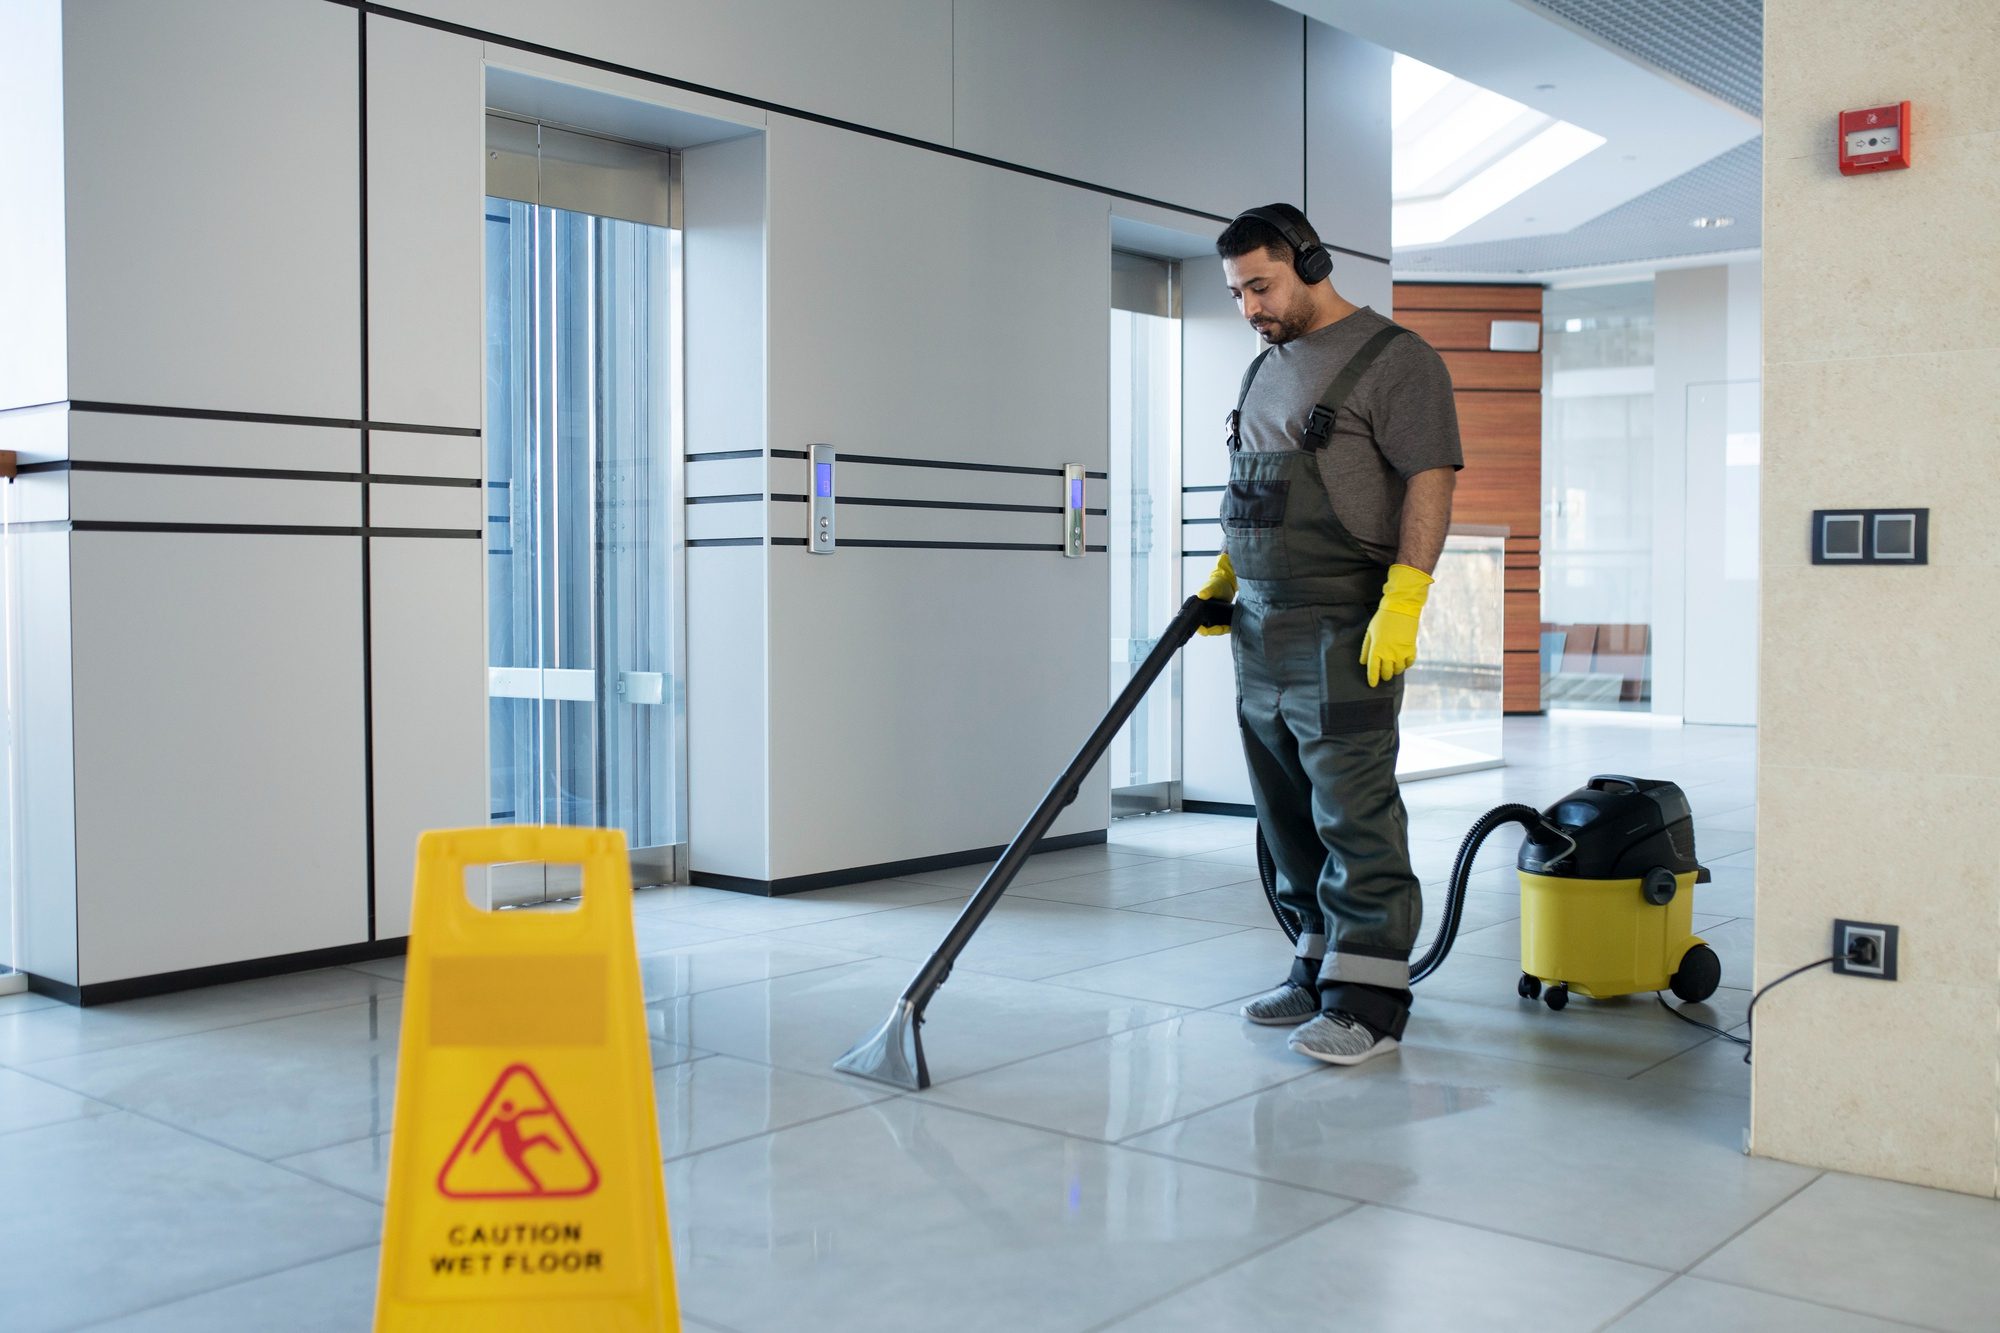 4 Tips For Best Practices On Cleaning Which Ensure Safety